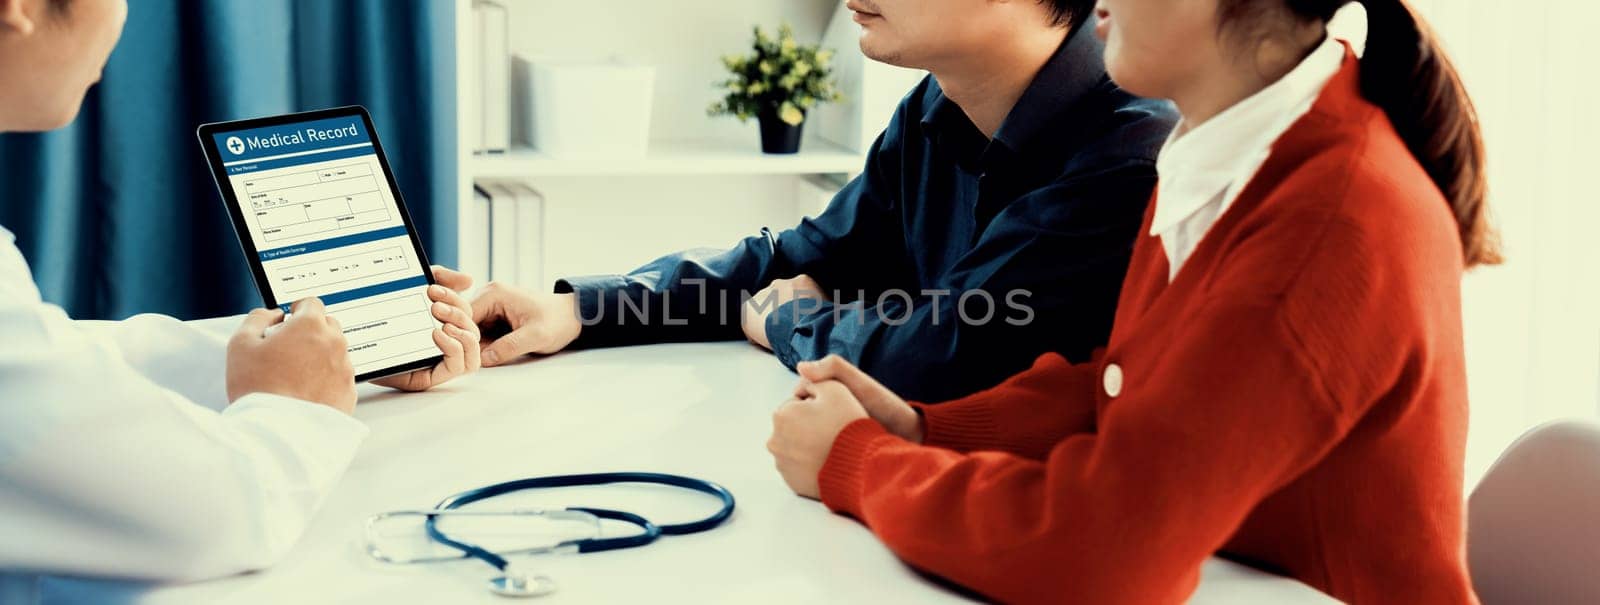 Couple attend fertility consultation with gynecologist at hospital as part family planning care for pregnancy. Loving husband and wife support each other through the doctor appointment. Panorama Rigid